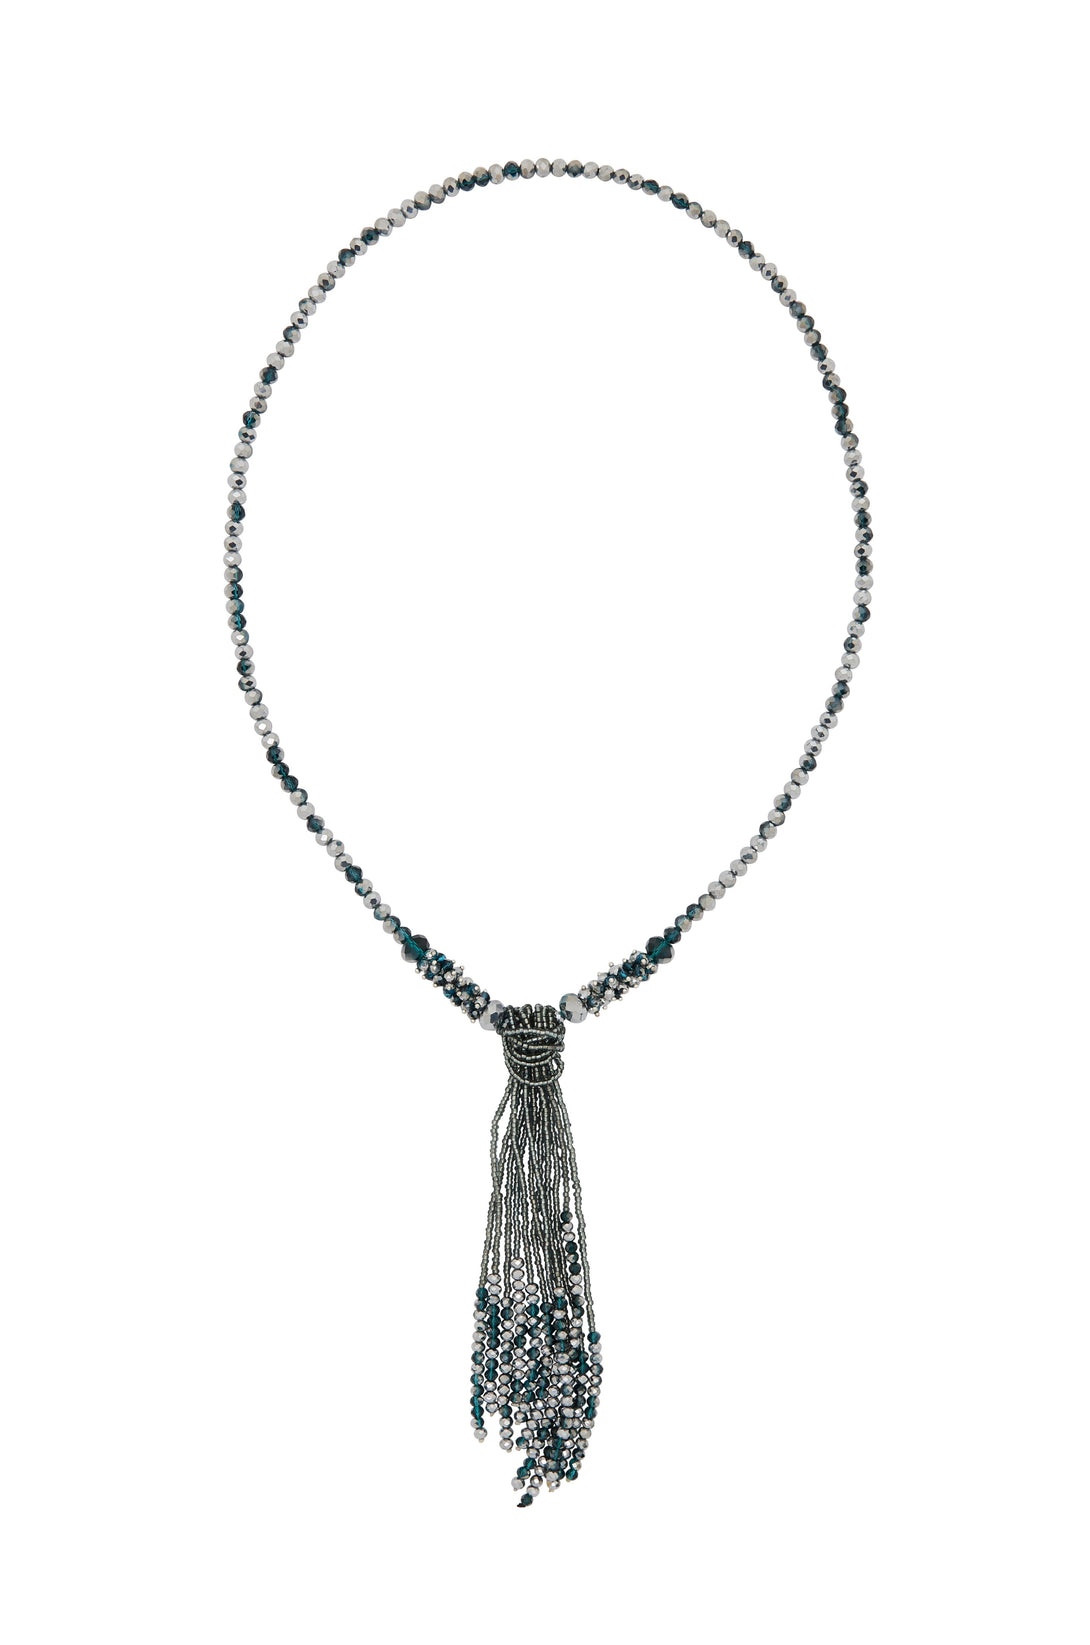 Avani Necklace Grey and Teal Necklace